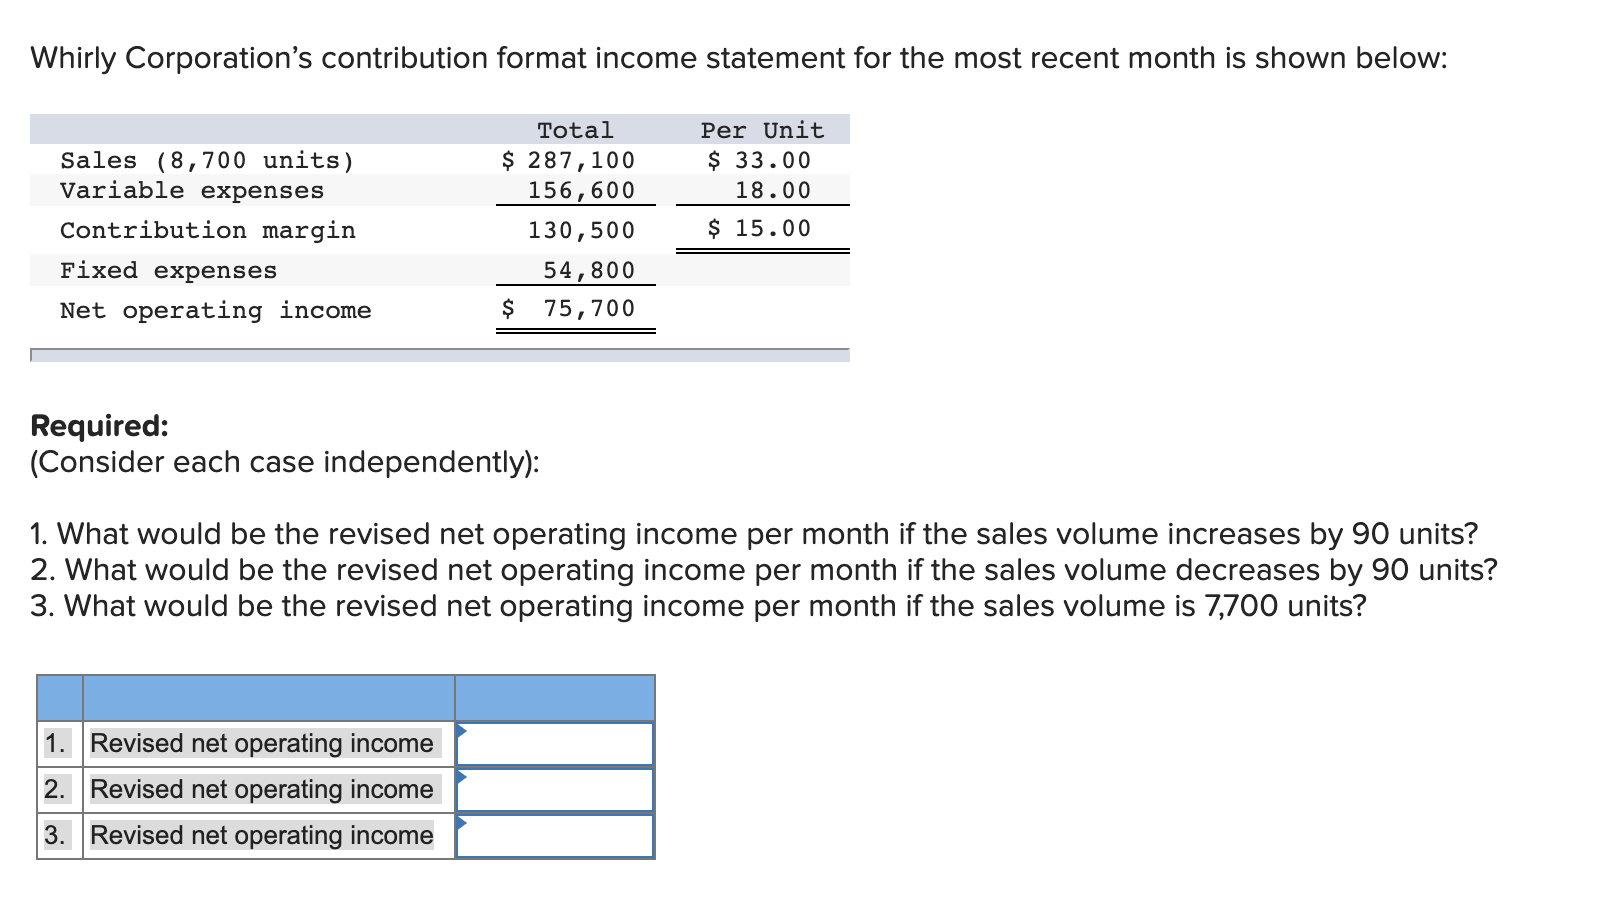 Whirly Corporations contribution format income statement for the most recent month is shown below:Sales (8,700 units)Varia